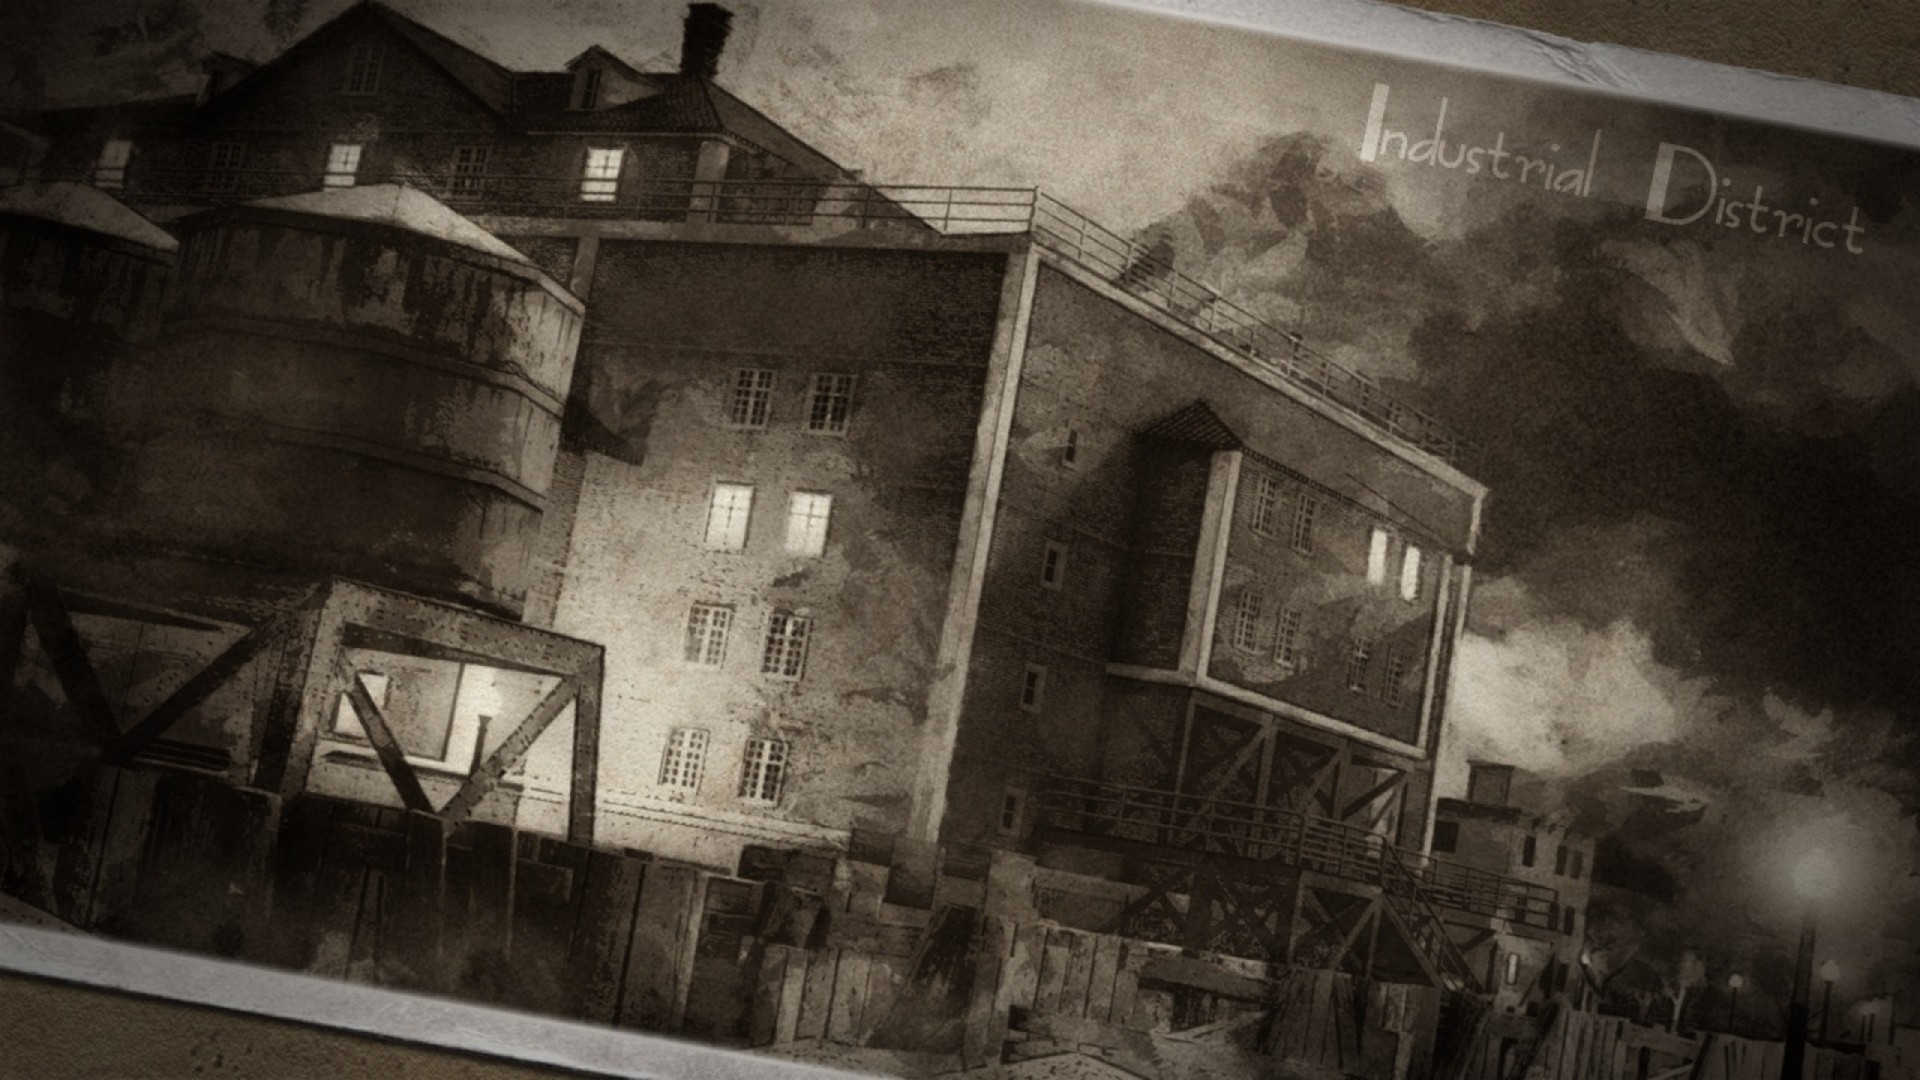 Omerta - City of Gangsters - The Arms Industry DLC Featured Screenshot #1